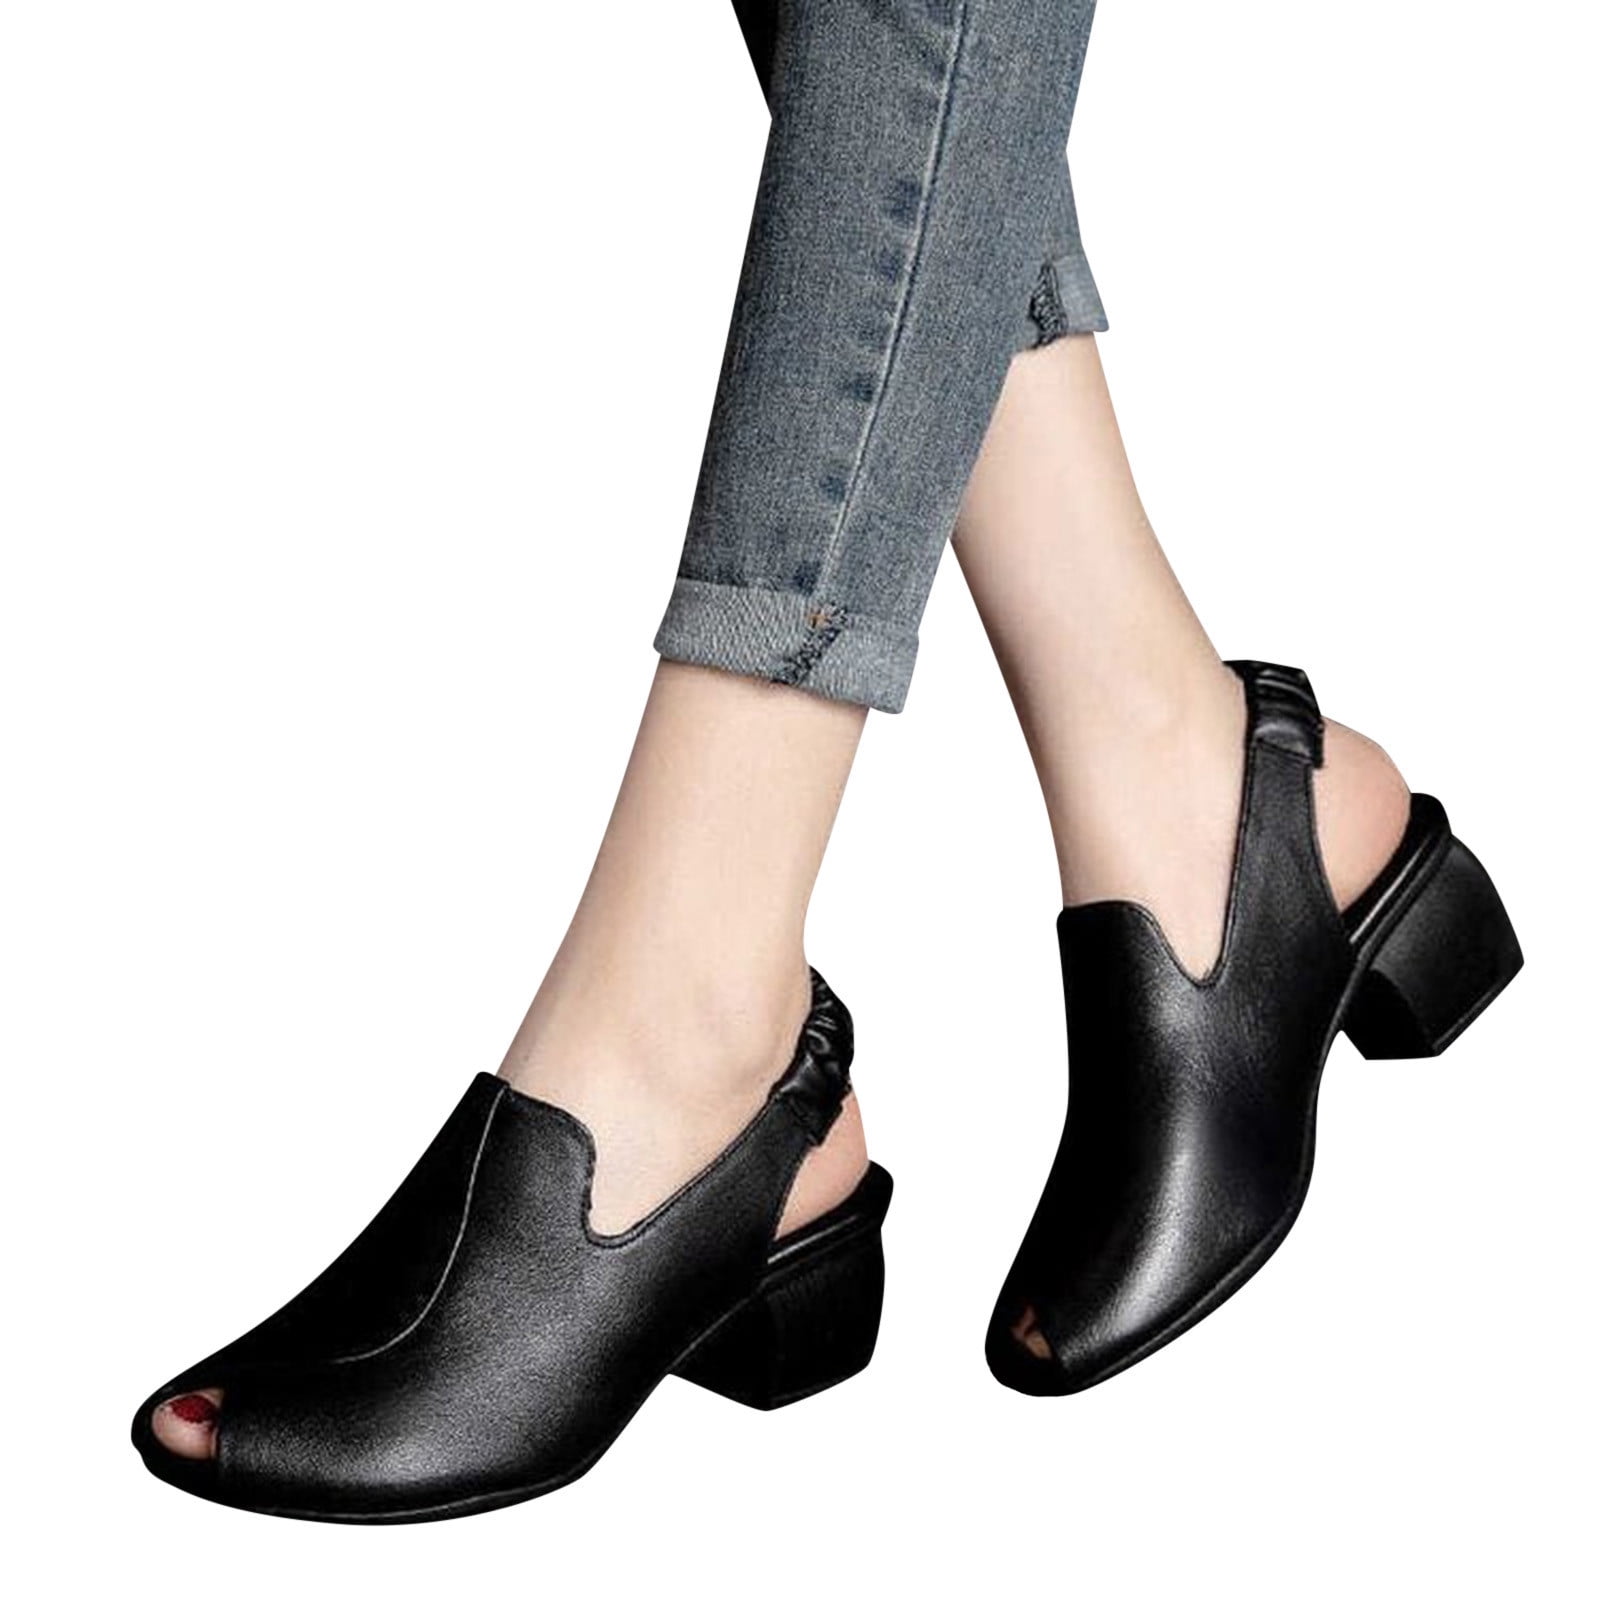 arch support dress shoes for women